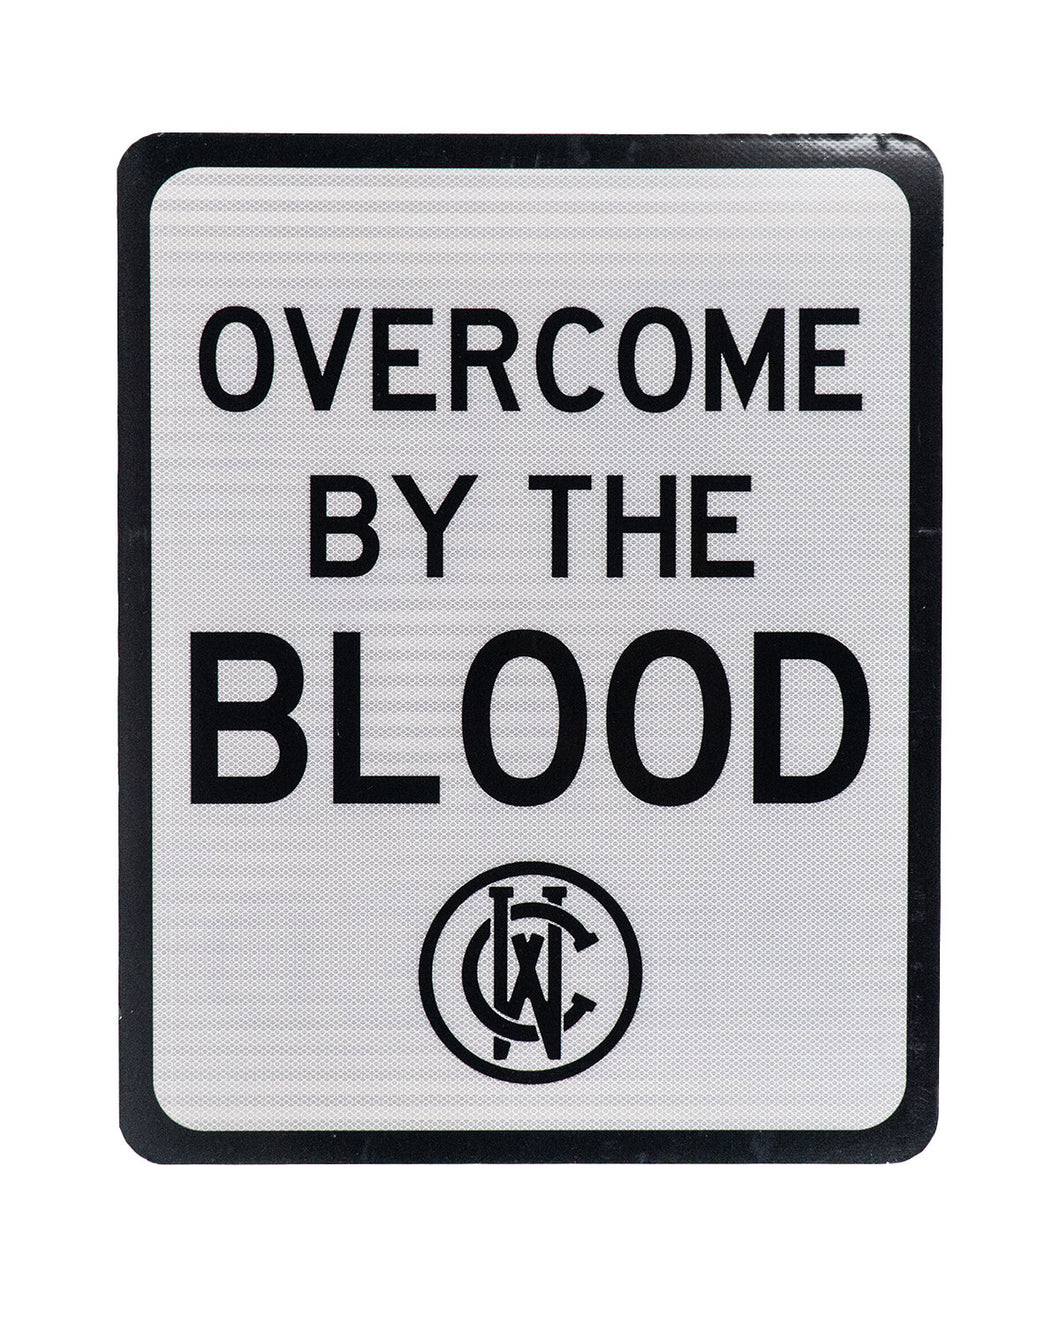 Overcome By The Blood - Road Sign